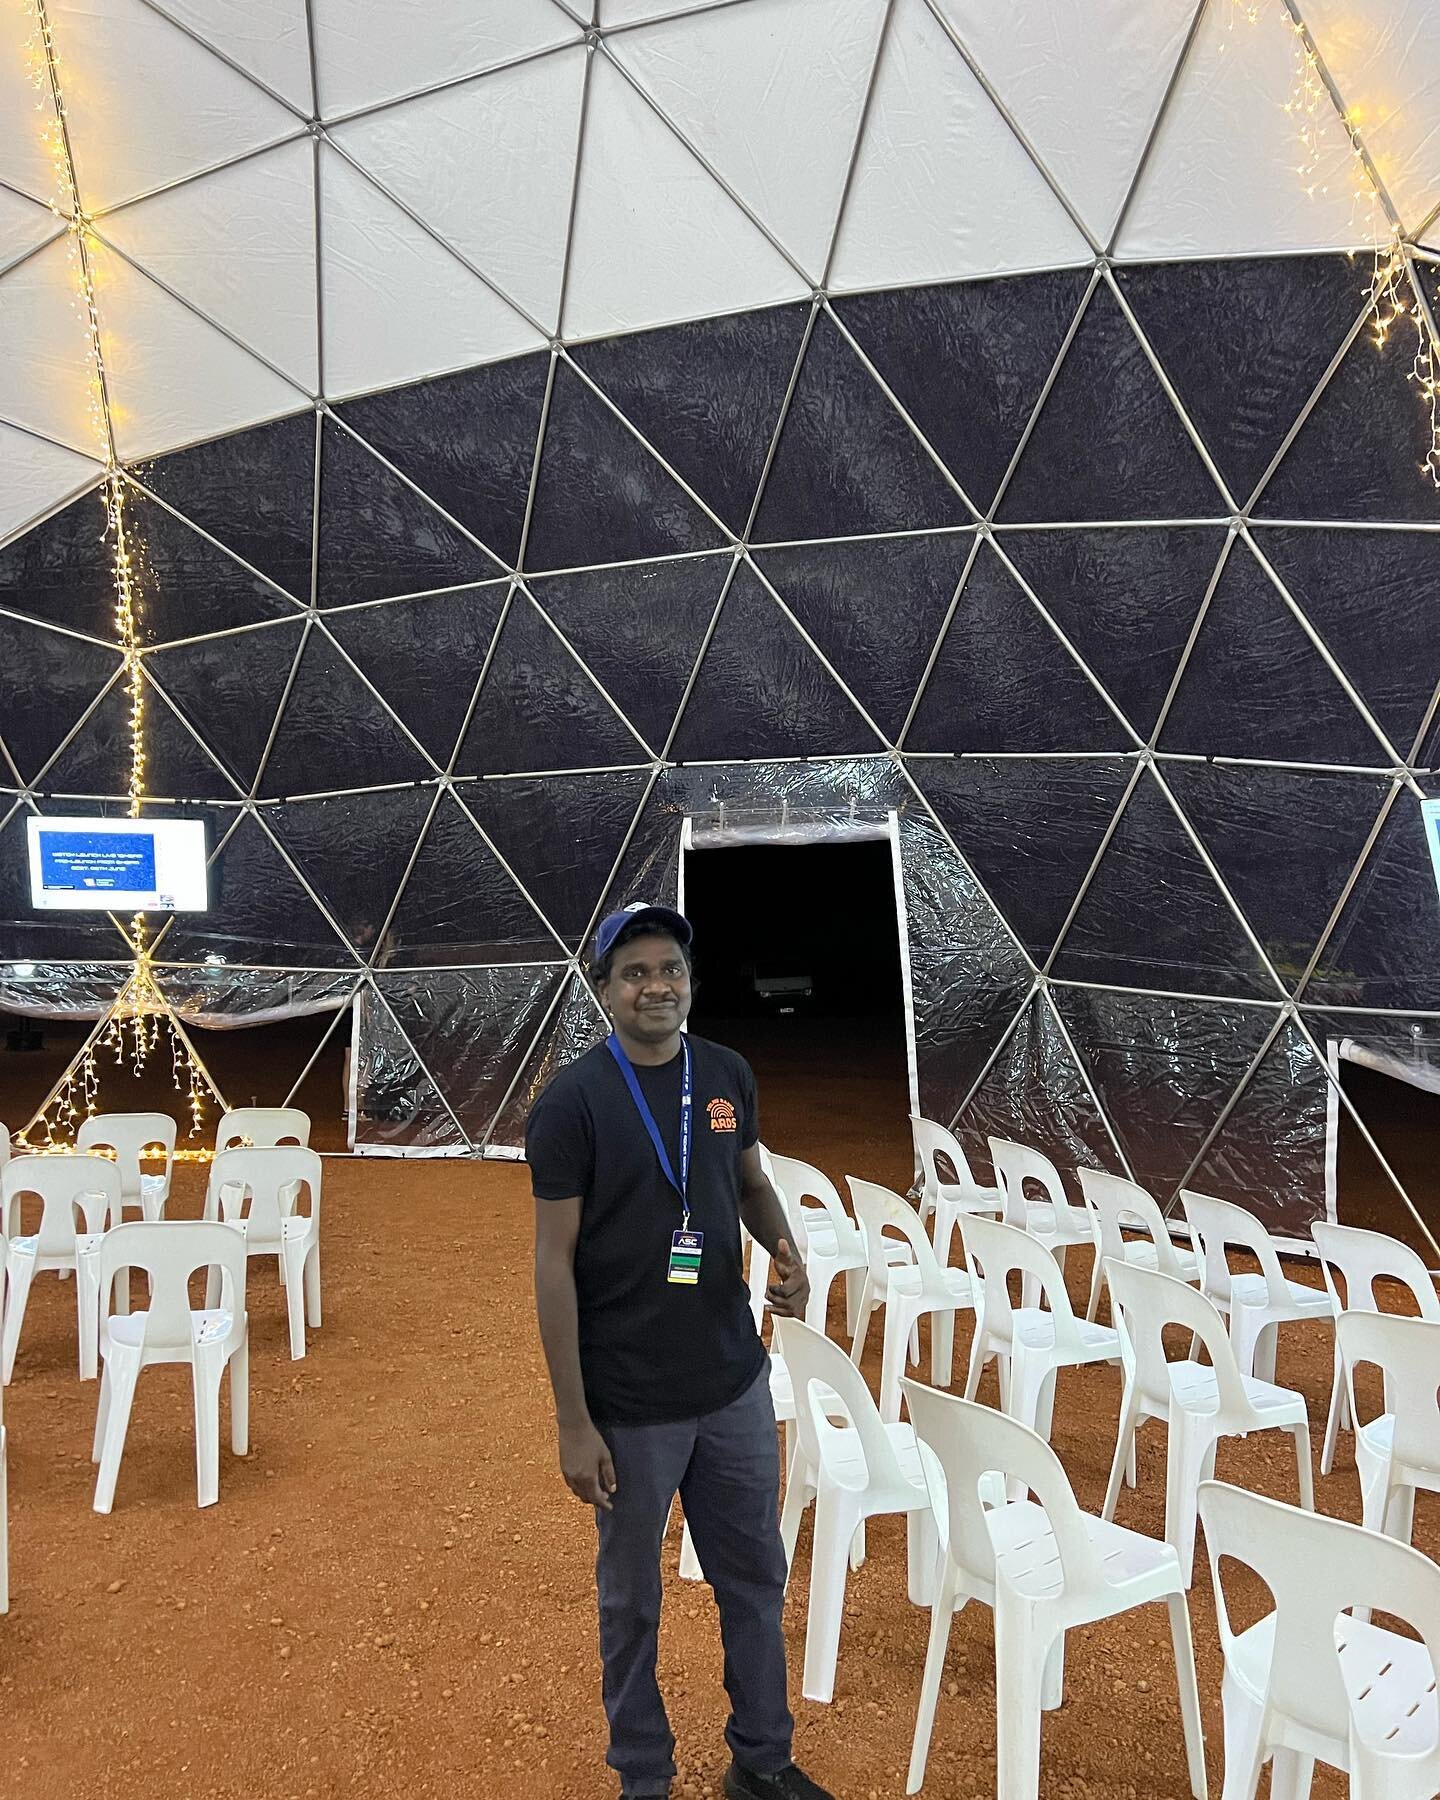 William Gumbula at the Arnhem Space Centre for the rocket launch last Sunday. 

Tune into 88.9FM to hear the full story.